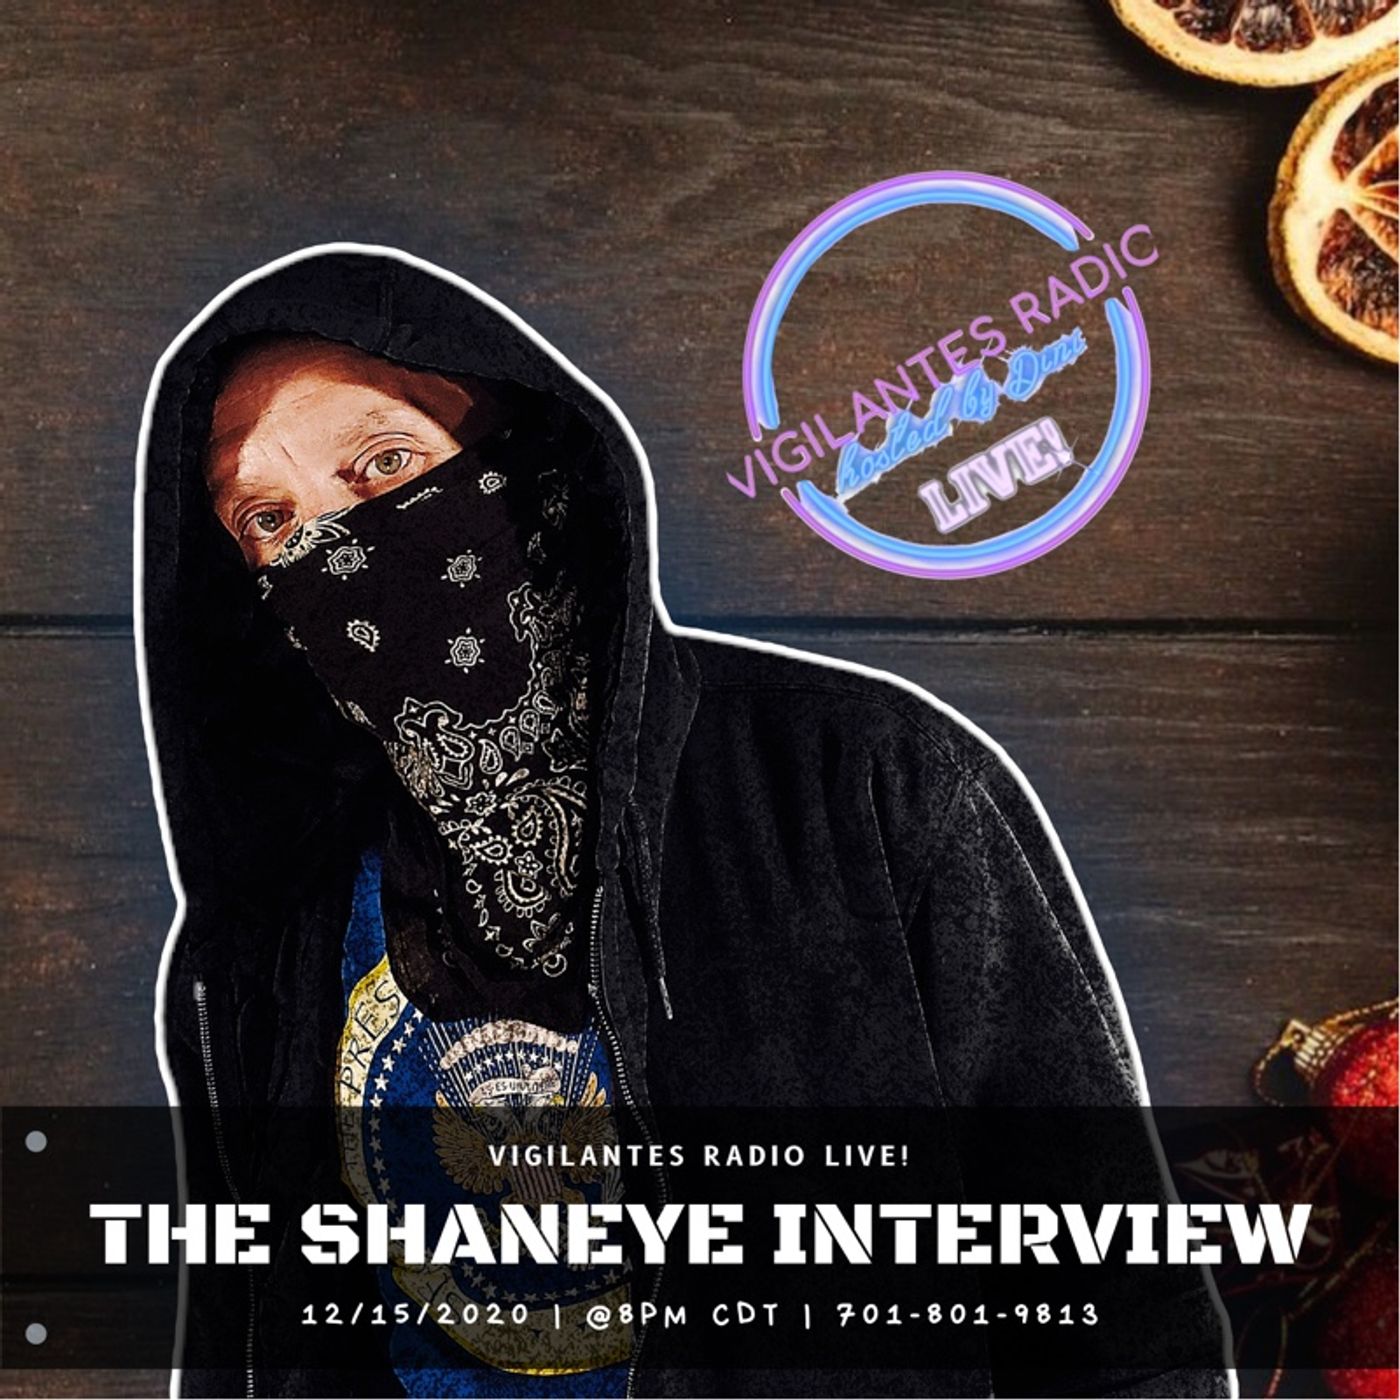 The ShanEye Interview. Image